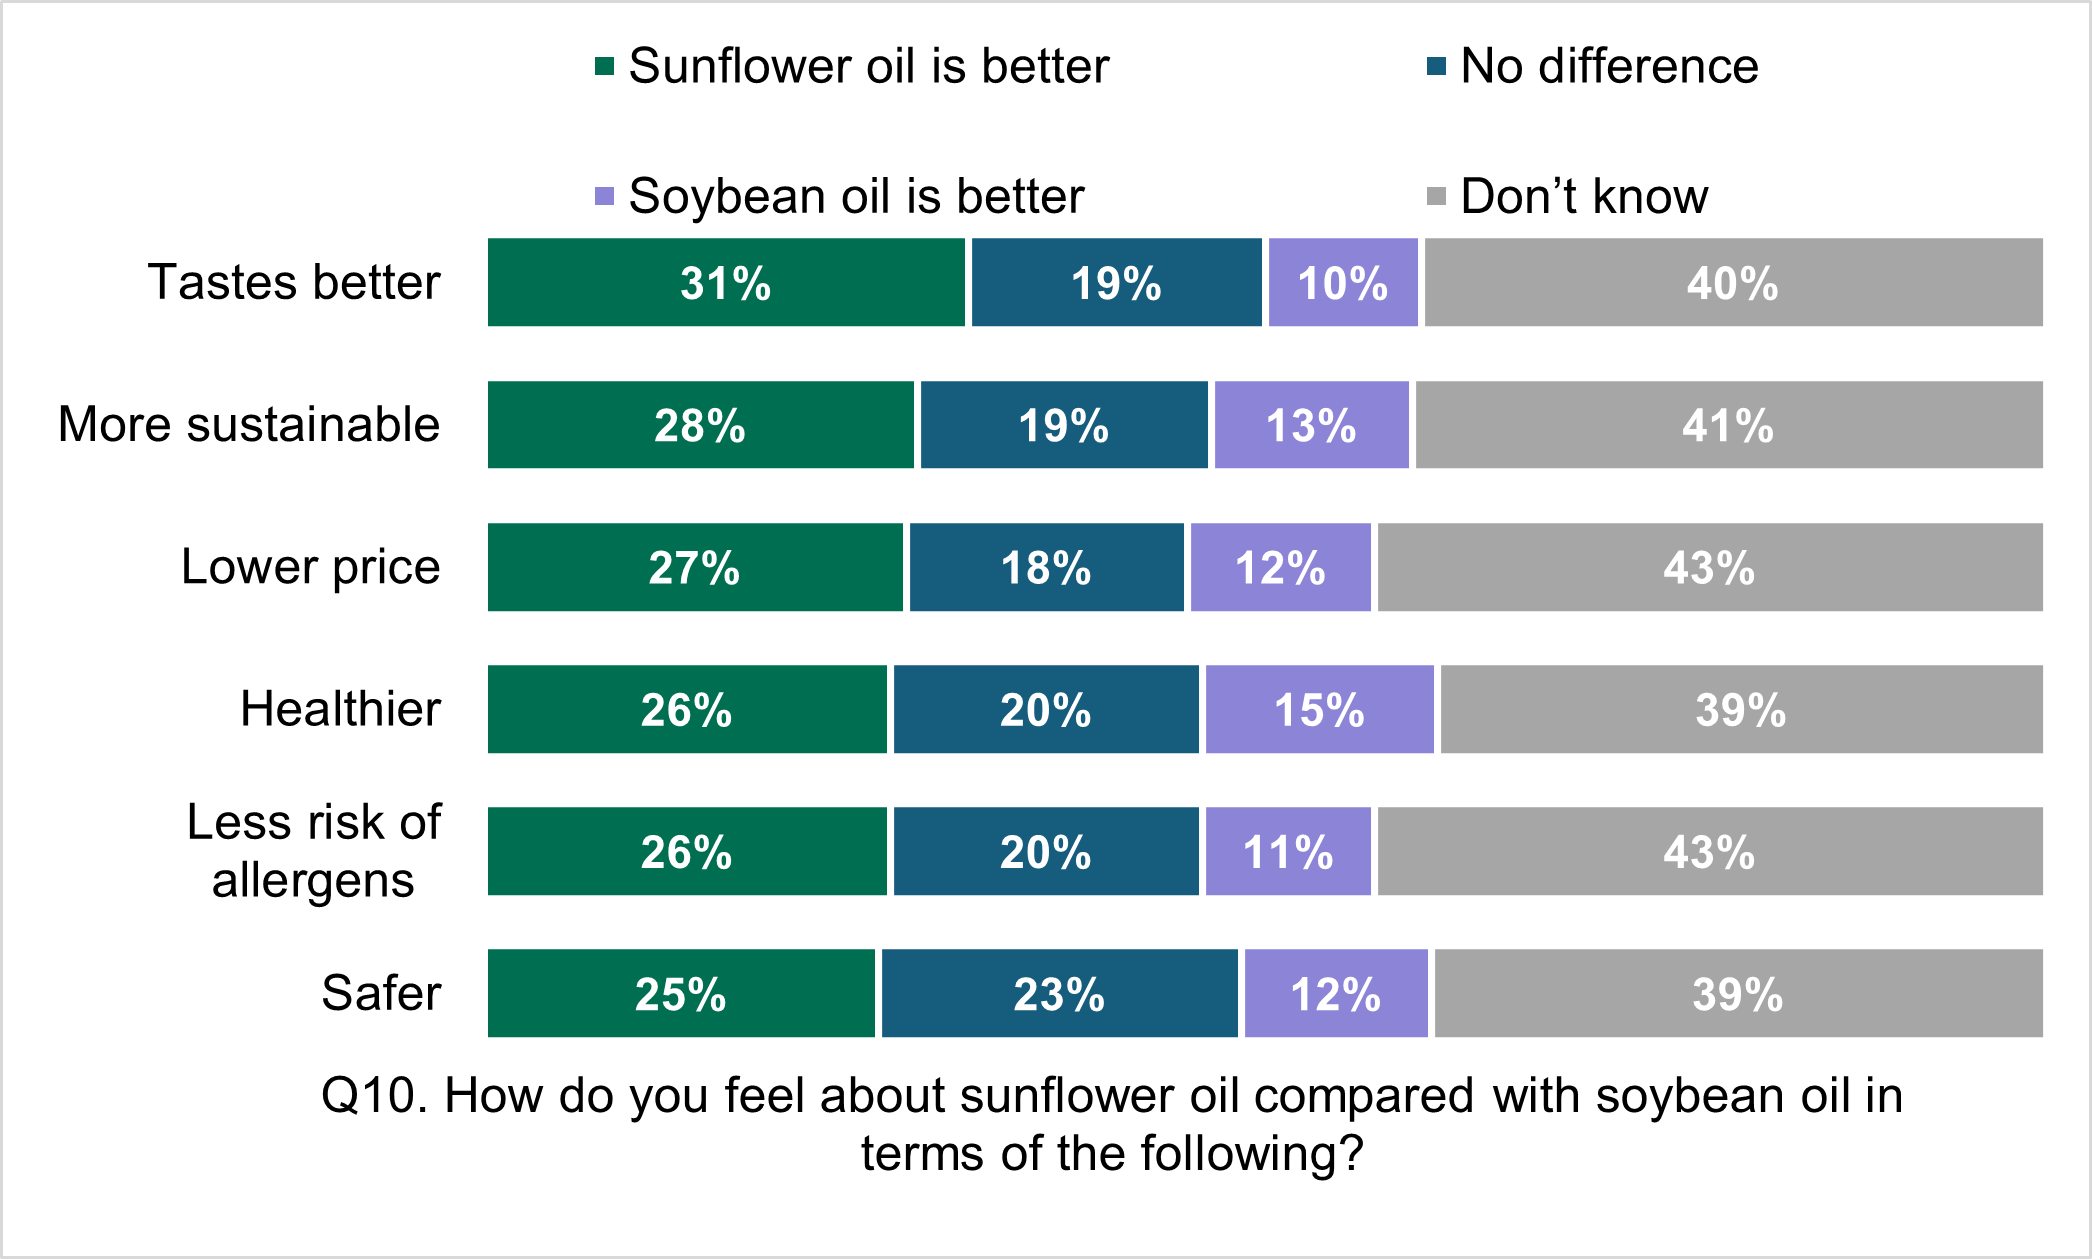 Consumer perceptions of sunflower oil compared to soybean oil, 31% believe sunflower oil tastes better and more sustainable. 